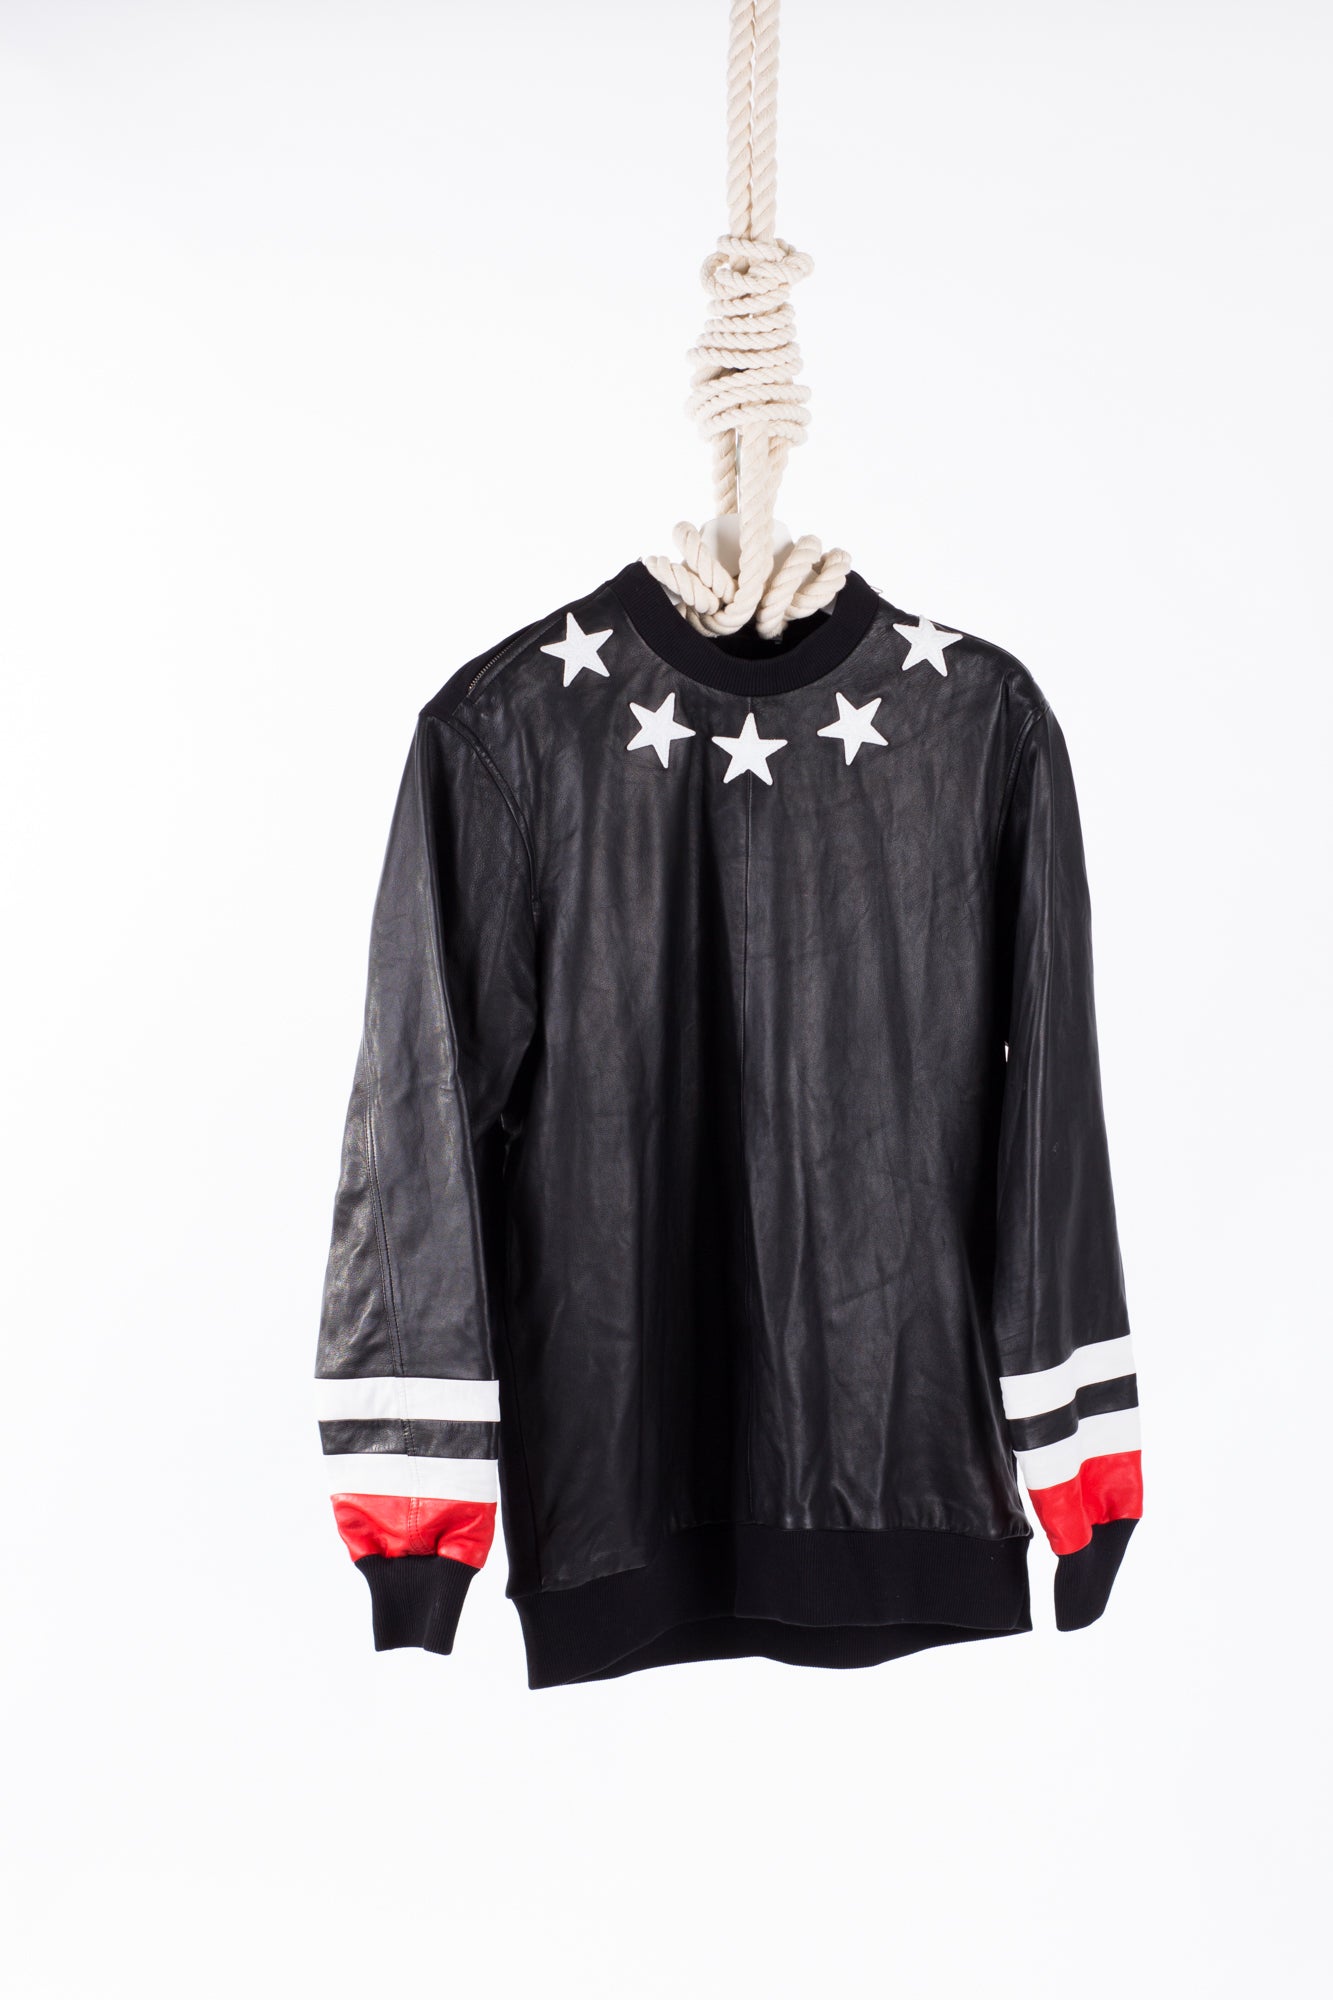 givenchy stars sweater